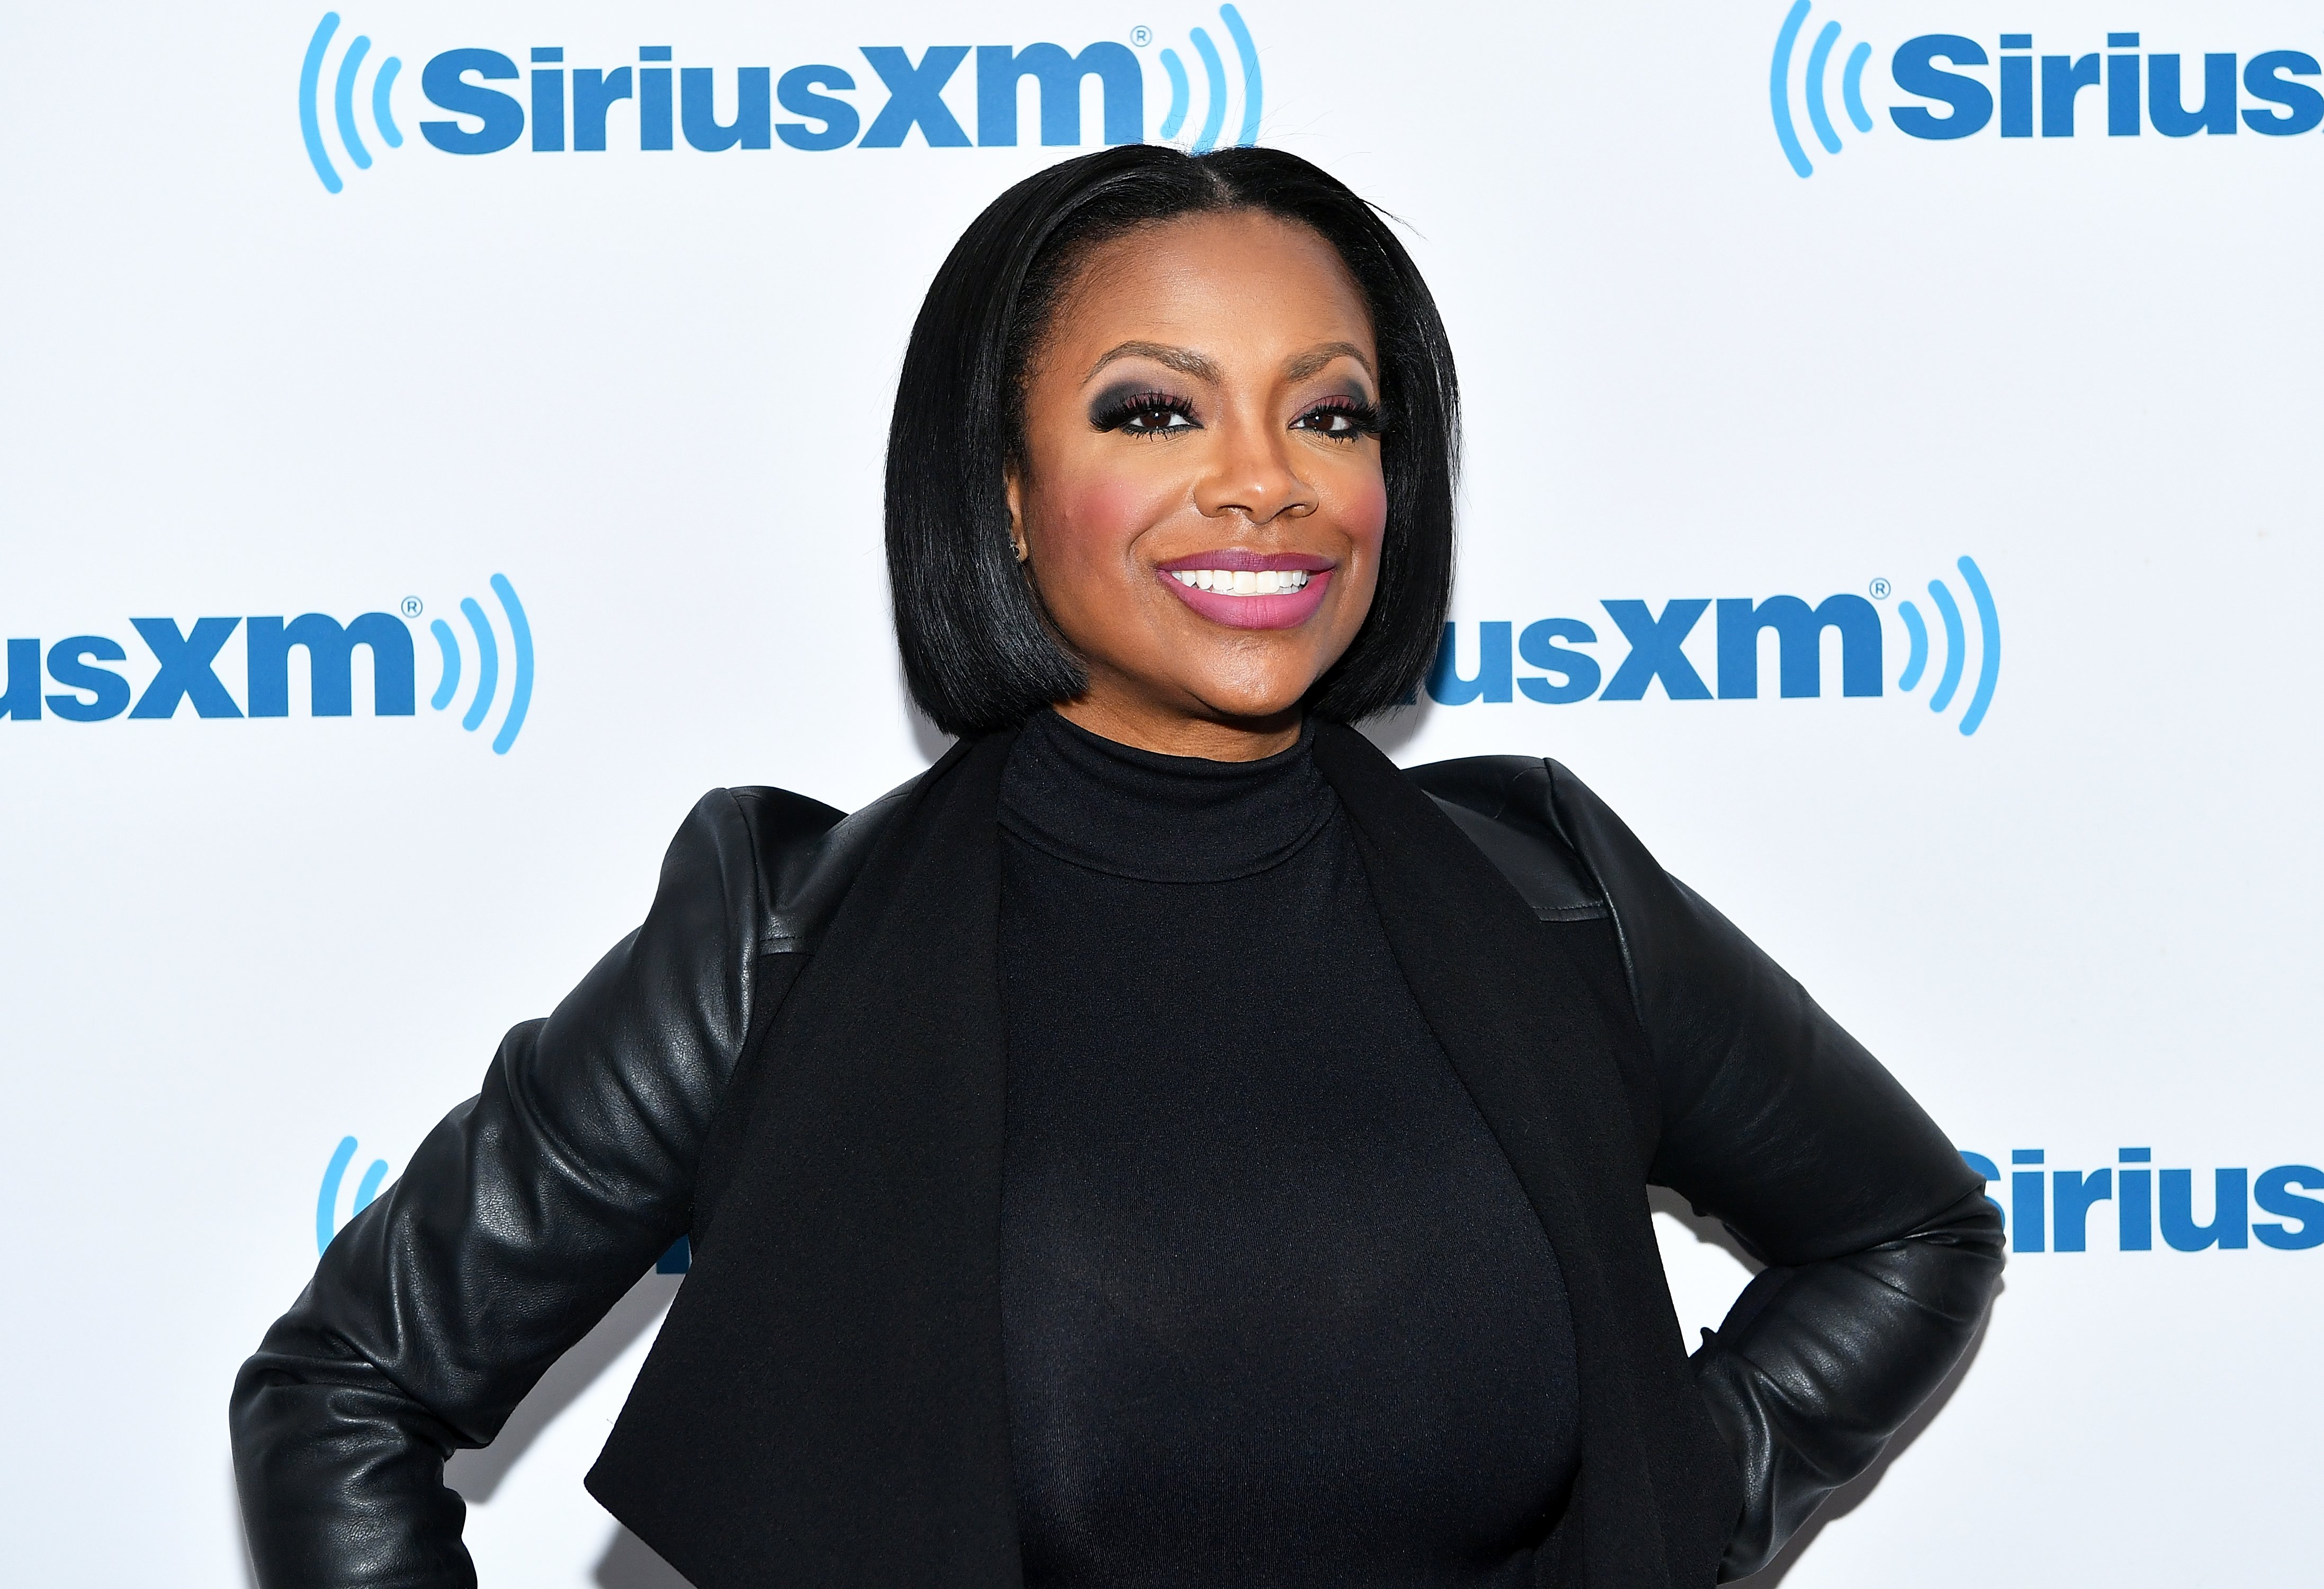 Kandi Burruss visiting the SiriusXM Studios in March 2018. | Photo: Getty Images